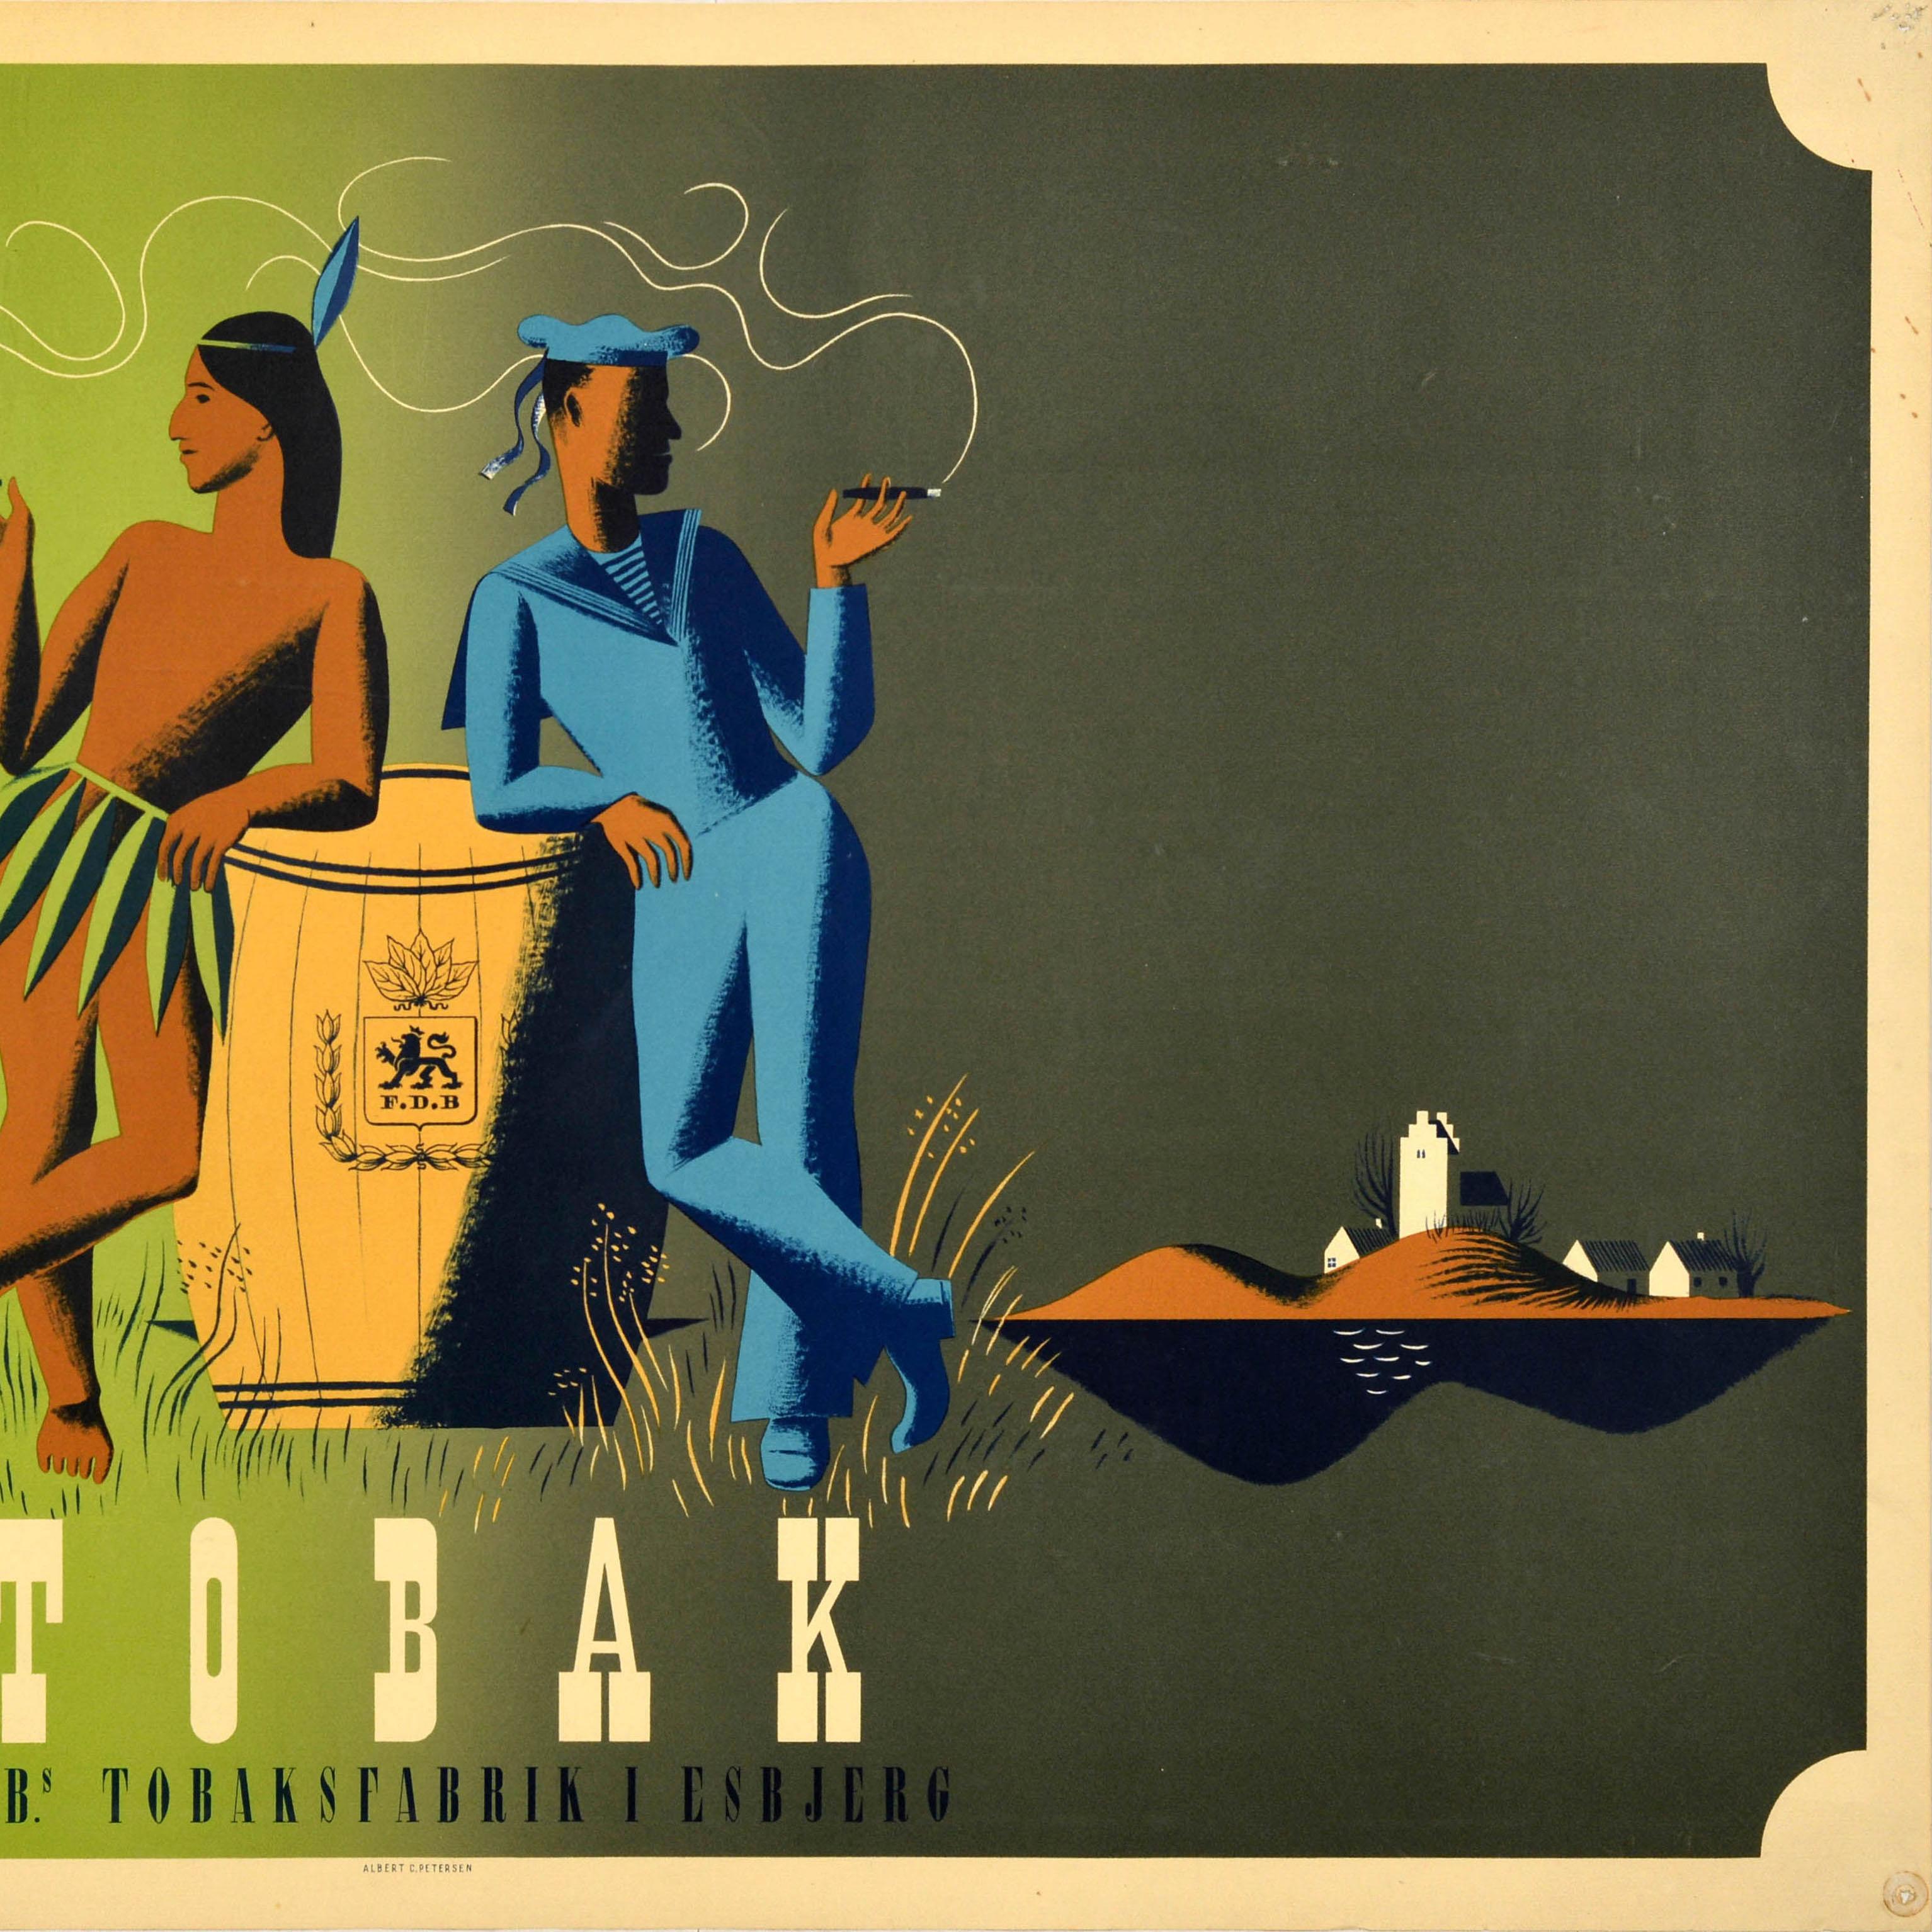 Original vintage advertising poster for the FDB Tobaksfabrik cigar and tobacco factory in Esbjerg - Tobak - featuring an illustration on two sides of two men smoking whilst leaning on a barrel stamped with the FDB logo on it, one dressed in a leaf